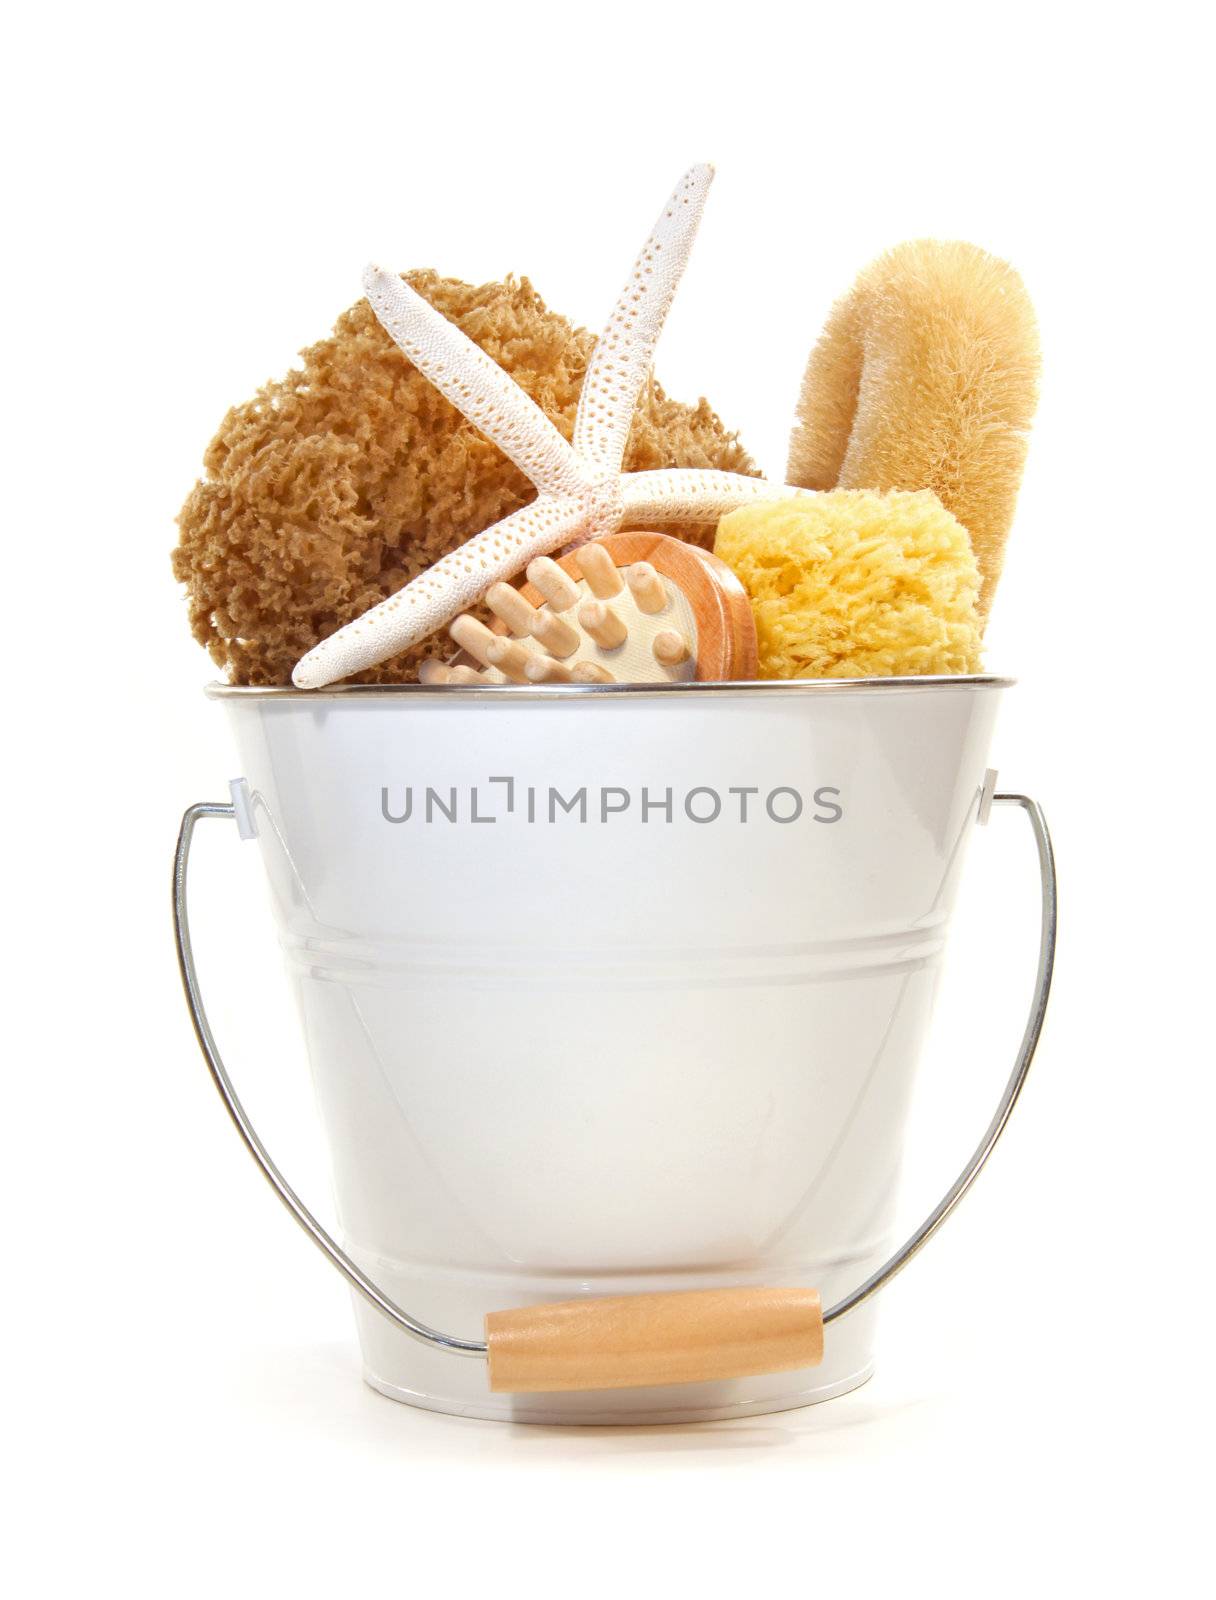 White bucket filled with sponges, brushes and starfish by Sandralise